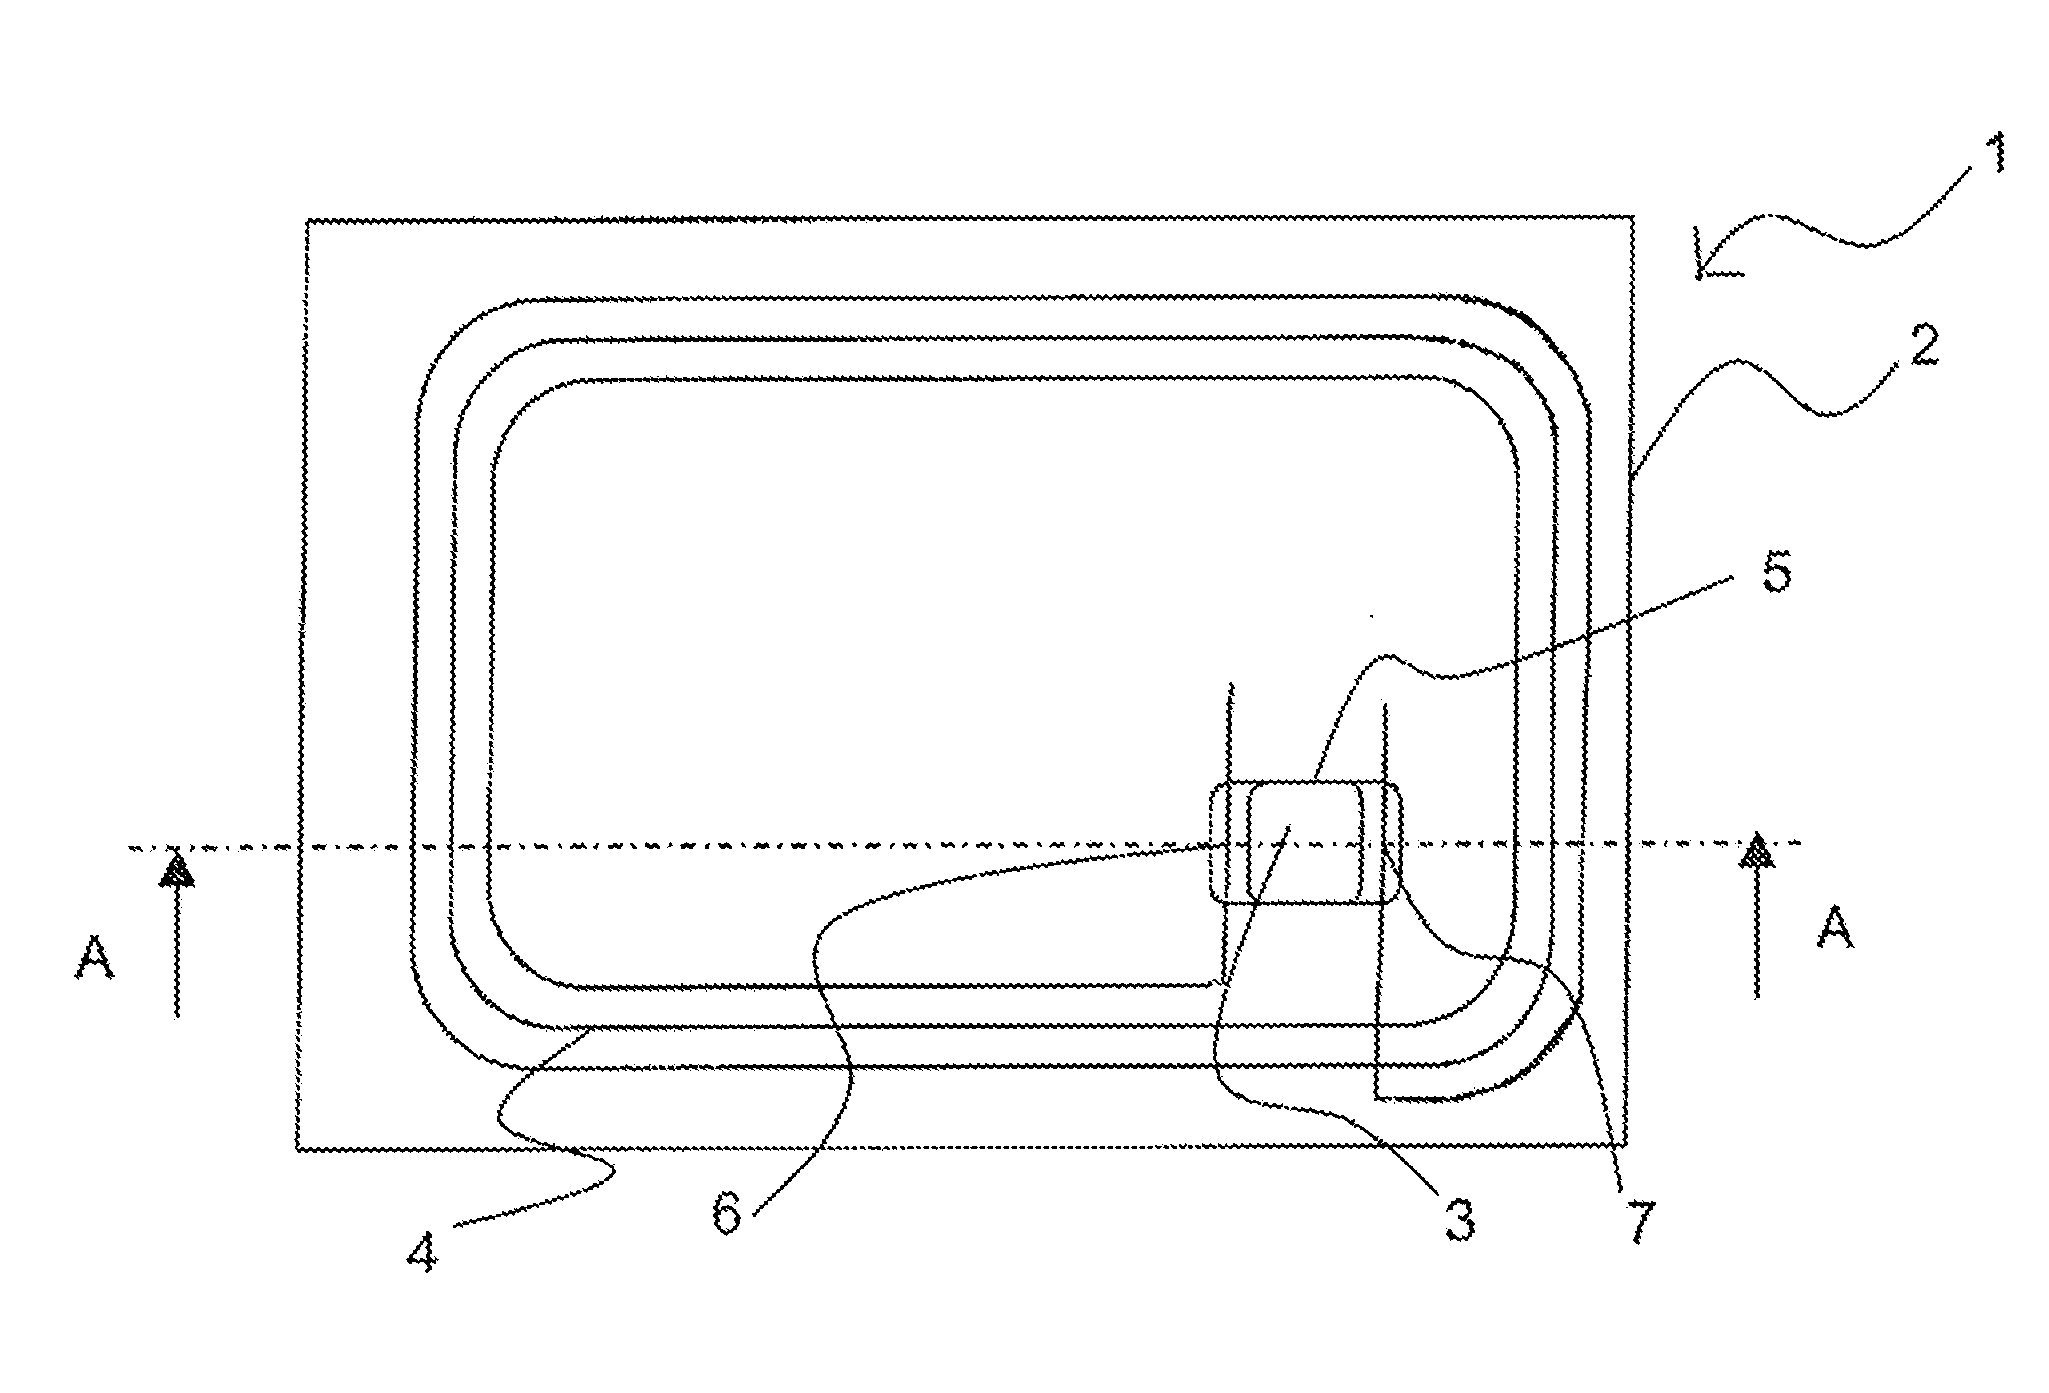 Fibrous insert consisting of a single layer and equipped with a contactless communication electronic device